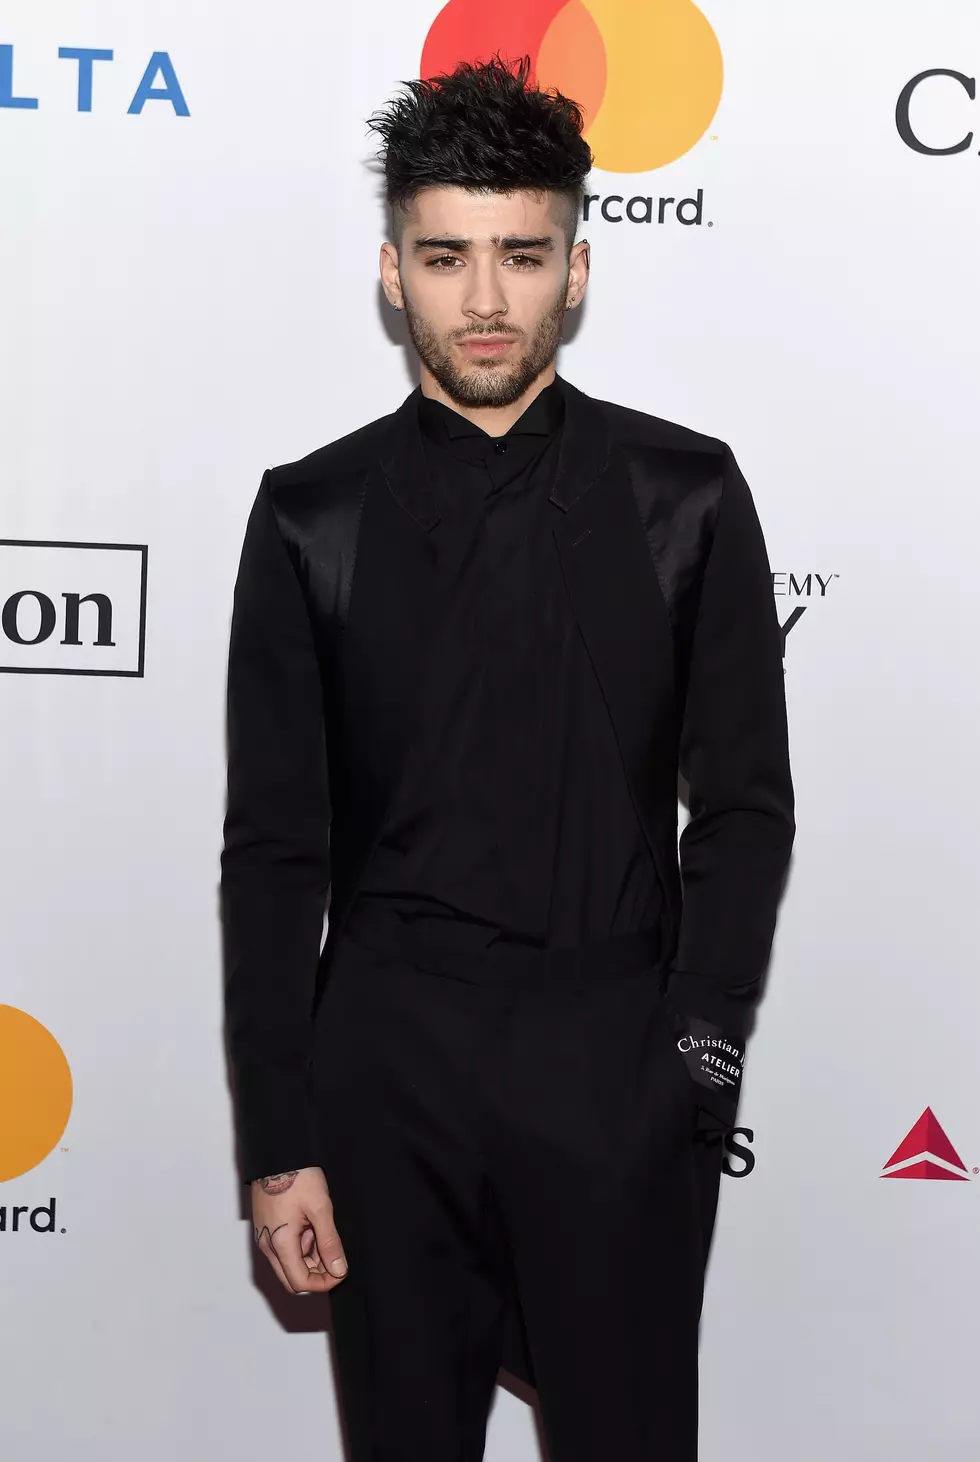 Zayn Malik Sexiest Photos From the Red Carpet